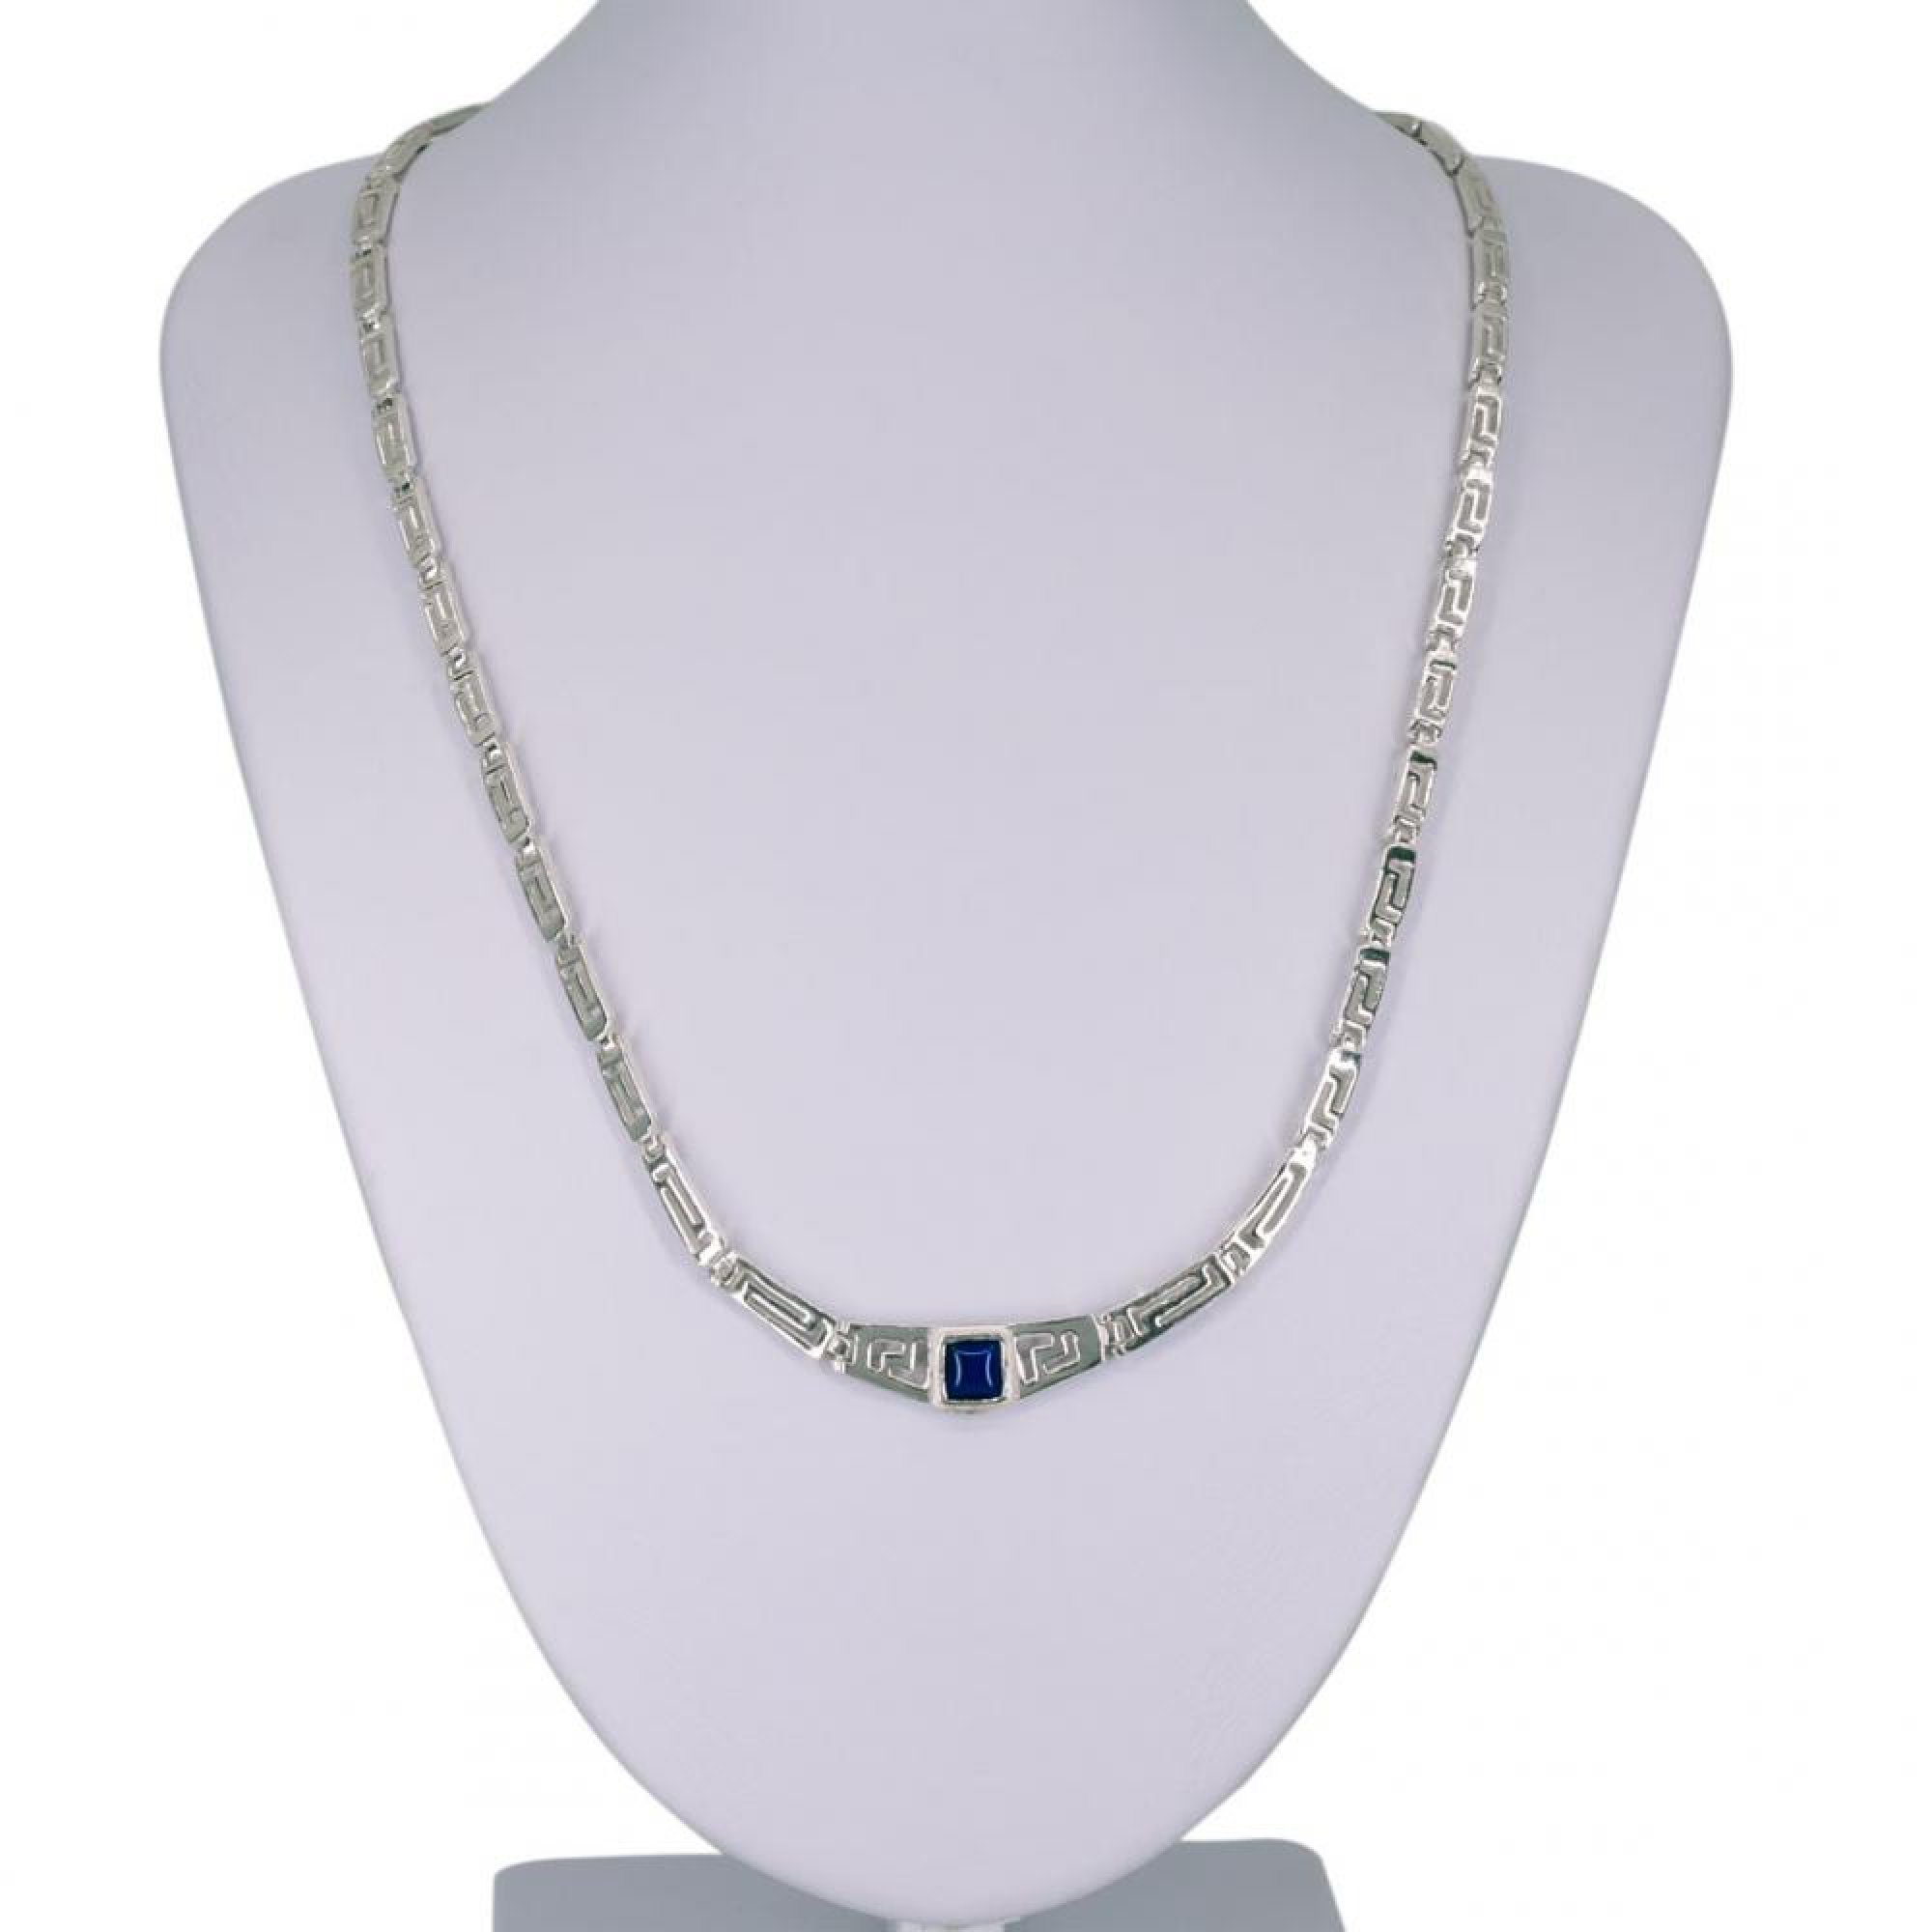 Meander necklace with lapis lazuli stone